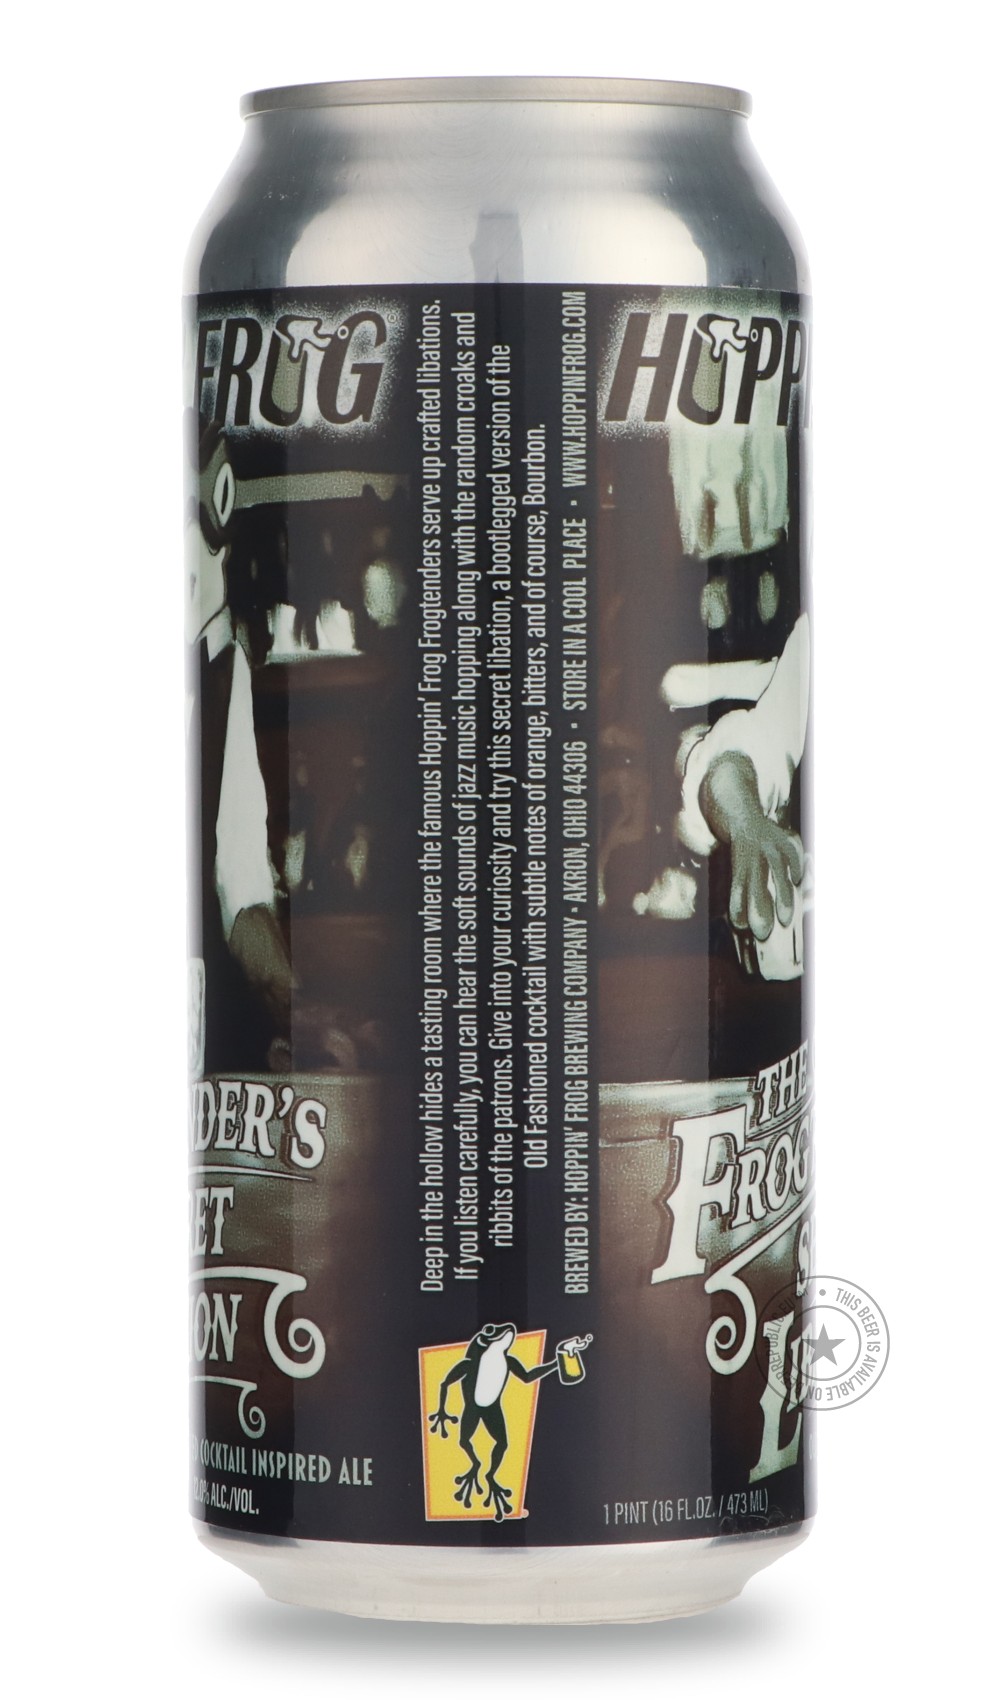 -Hoppin' Frog- The Frogtender's Secret Libation Old Fashioned Cocktail Inspired Ale-Brown & Dark- Only @ Beer Republic - The best online beer store for American & Canadian craft beer - Buy beer online from the USA and Canada - Bier online kopen - Amerikaans bier kopen - Craft beer store - Craft beer kopen - Amerikanisch bier kaufen - Bier online kaufen - Acheter biere online - IPA - Stout - Porter - New England IPA - Hazy IPA - Imperial Stout - Barrel Aged - Barrel Aged Imperial Stout - Brown - Dark beer - 